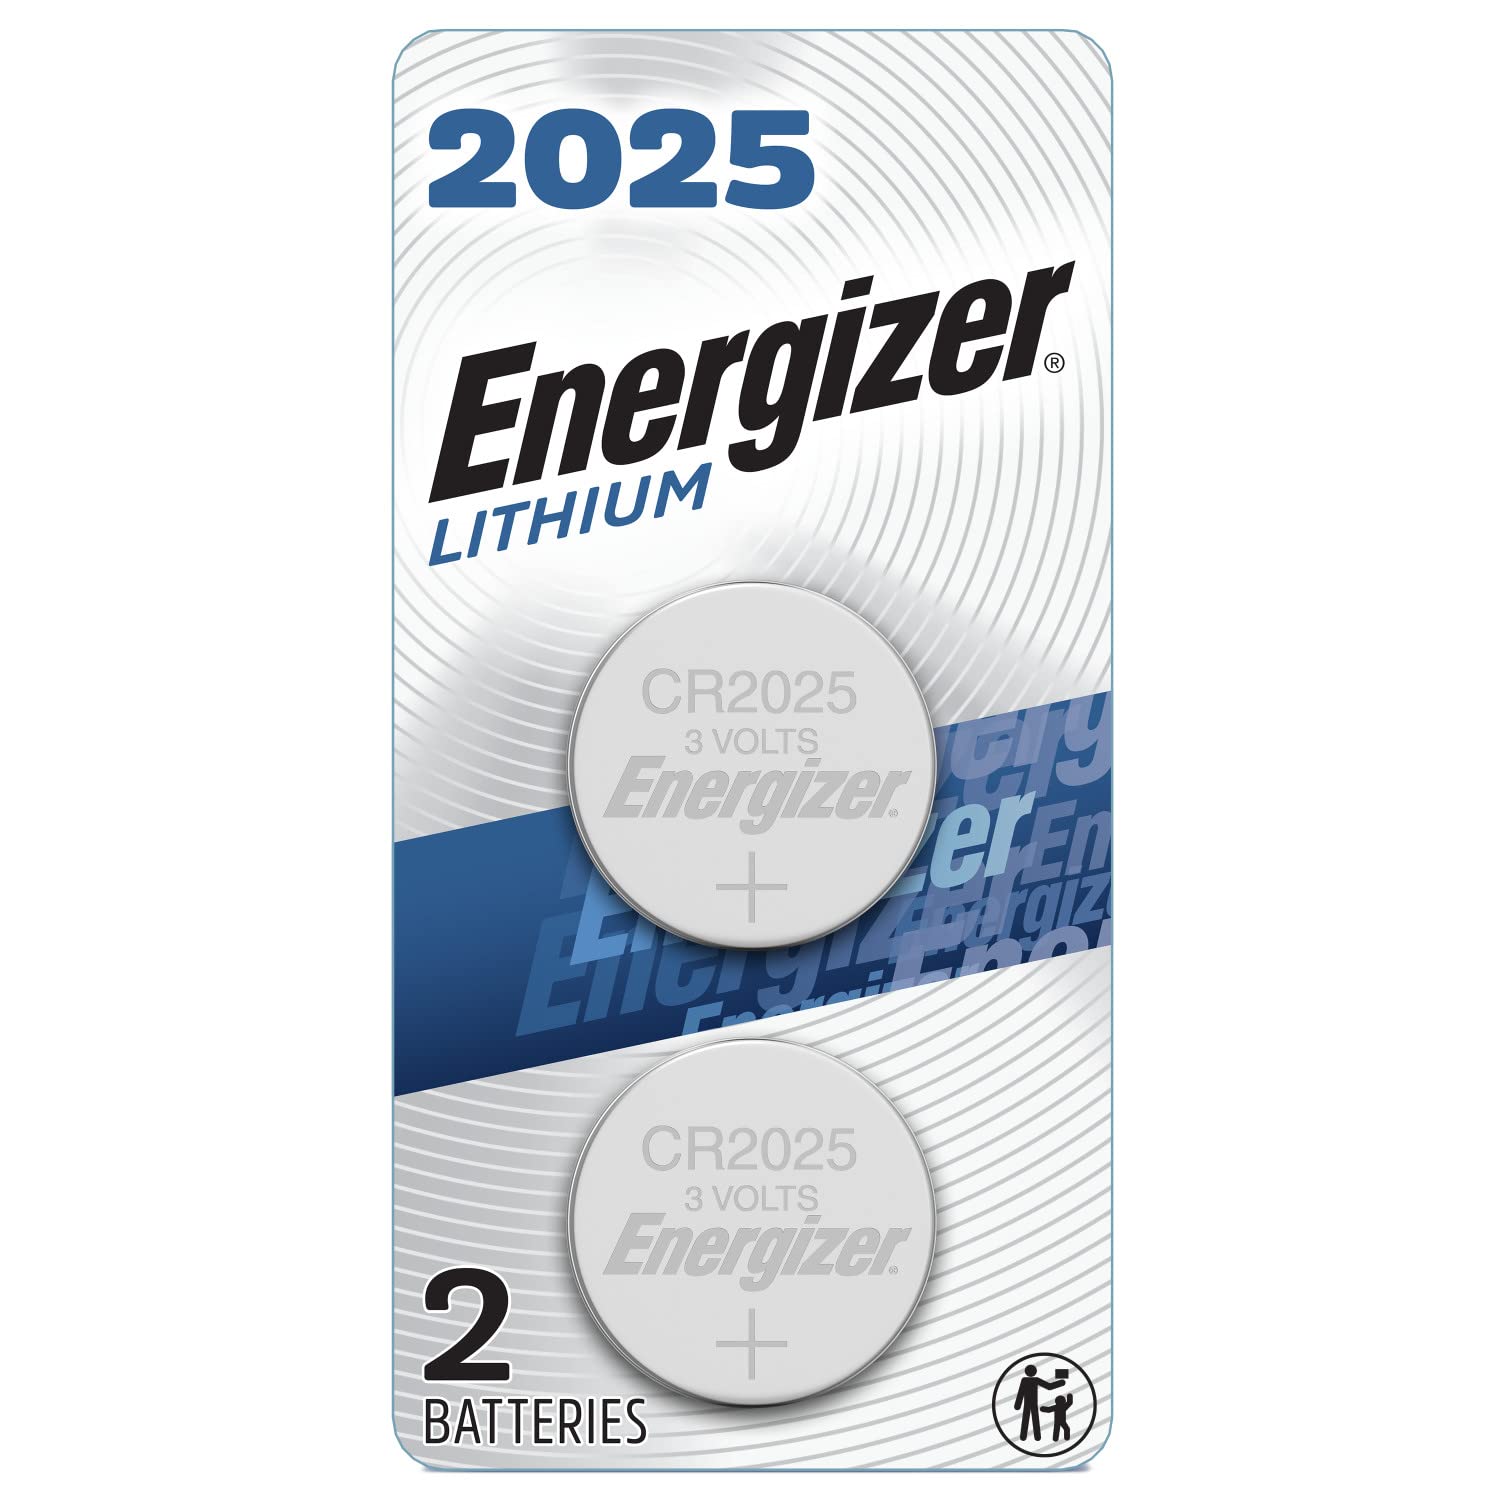 Energizer Battery, 3V Lithium Coin Cell Batteries, Packaging May Vary, Black, 2 Count